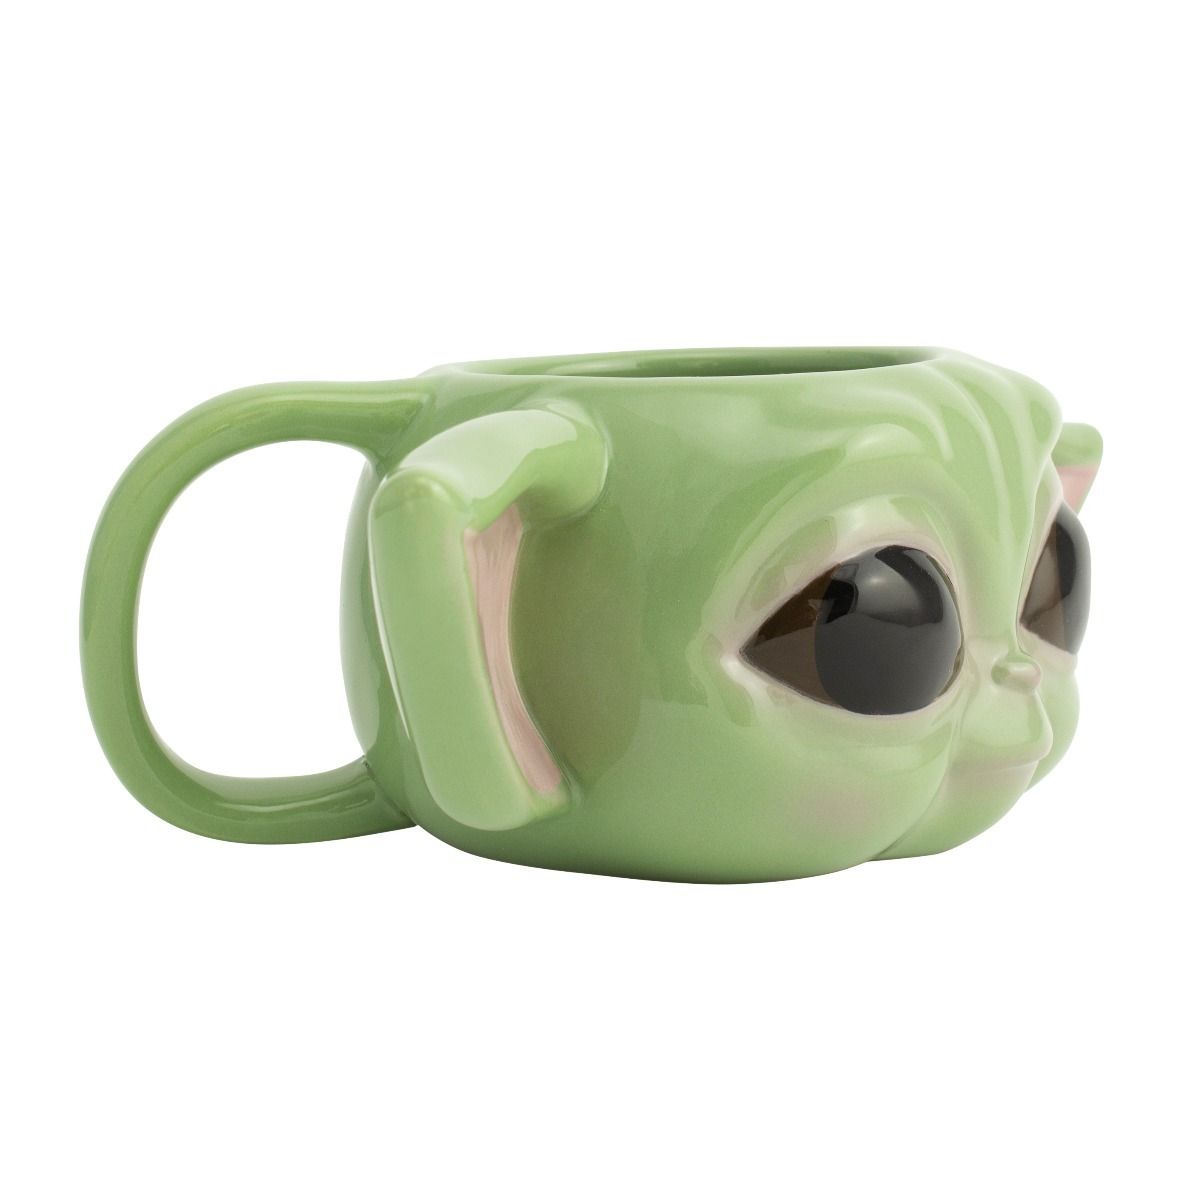 Tasse thermosensible l'Enfant The Mandalorian Traditional Gifts